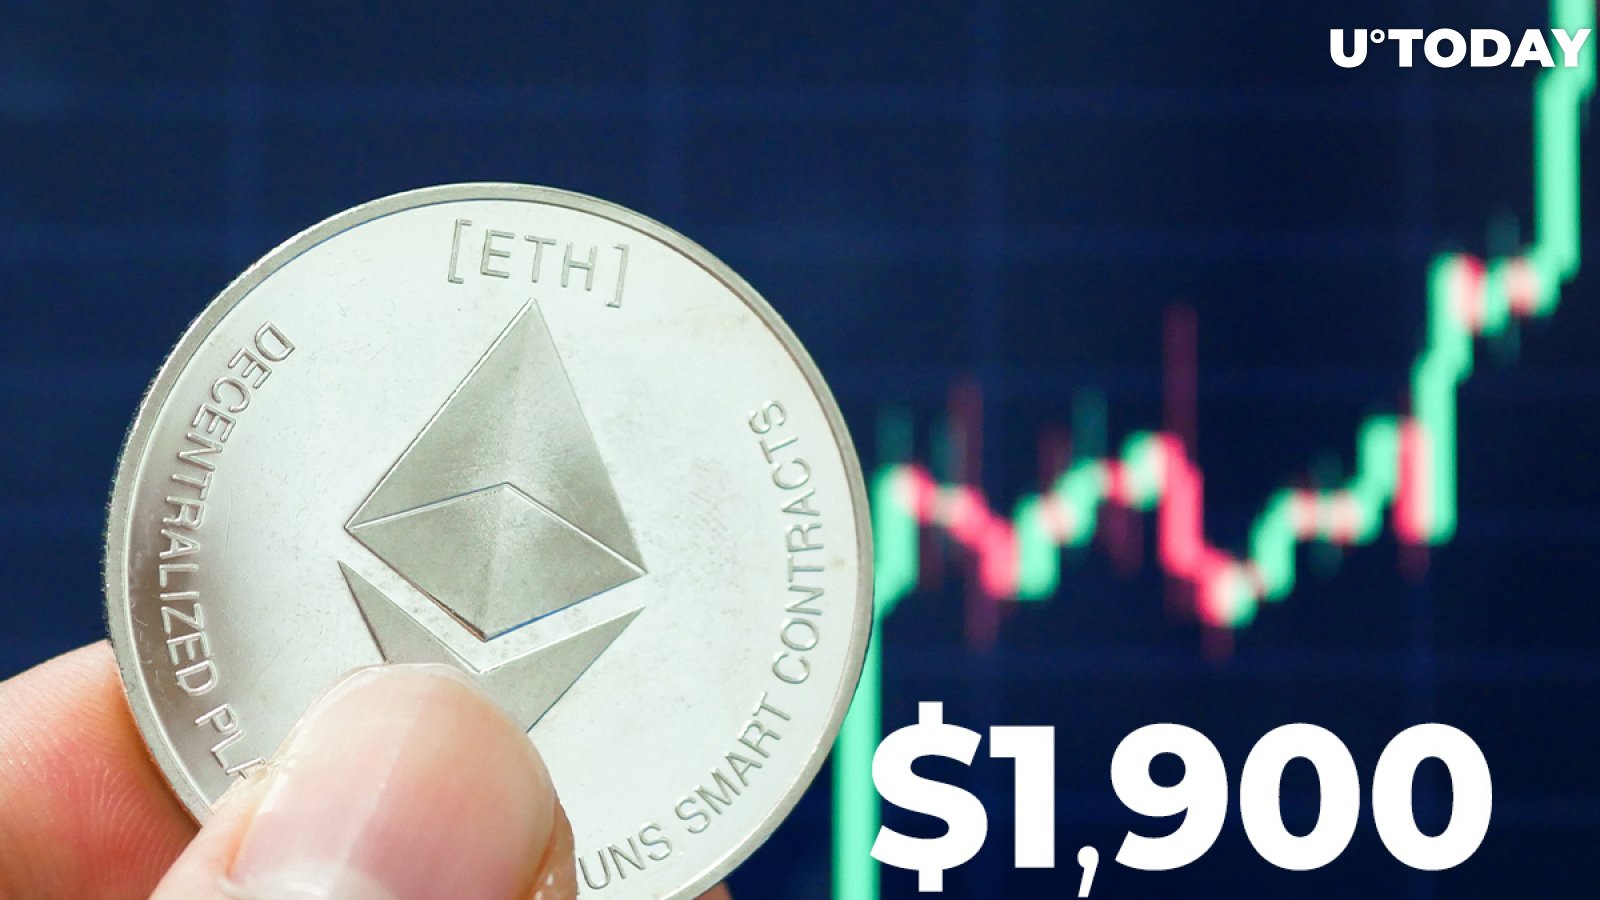 Ethereum (ETH) Inches Close to $1,900 As Another All-Time High Is Reached